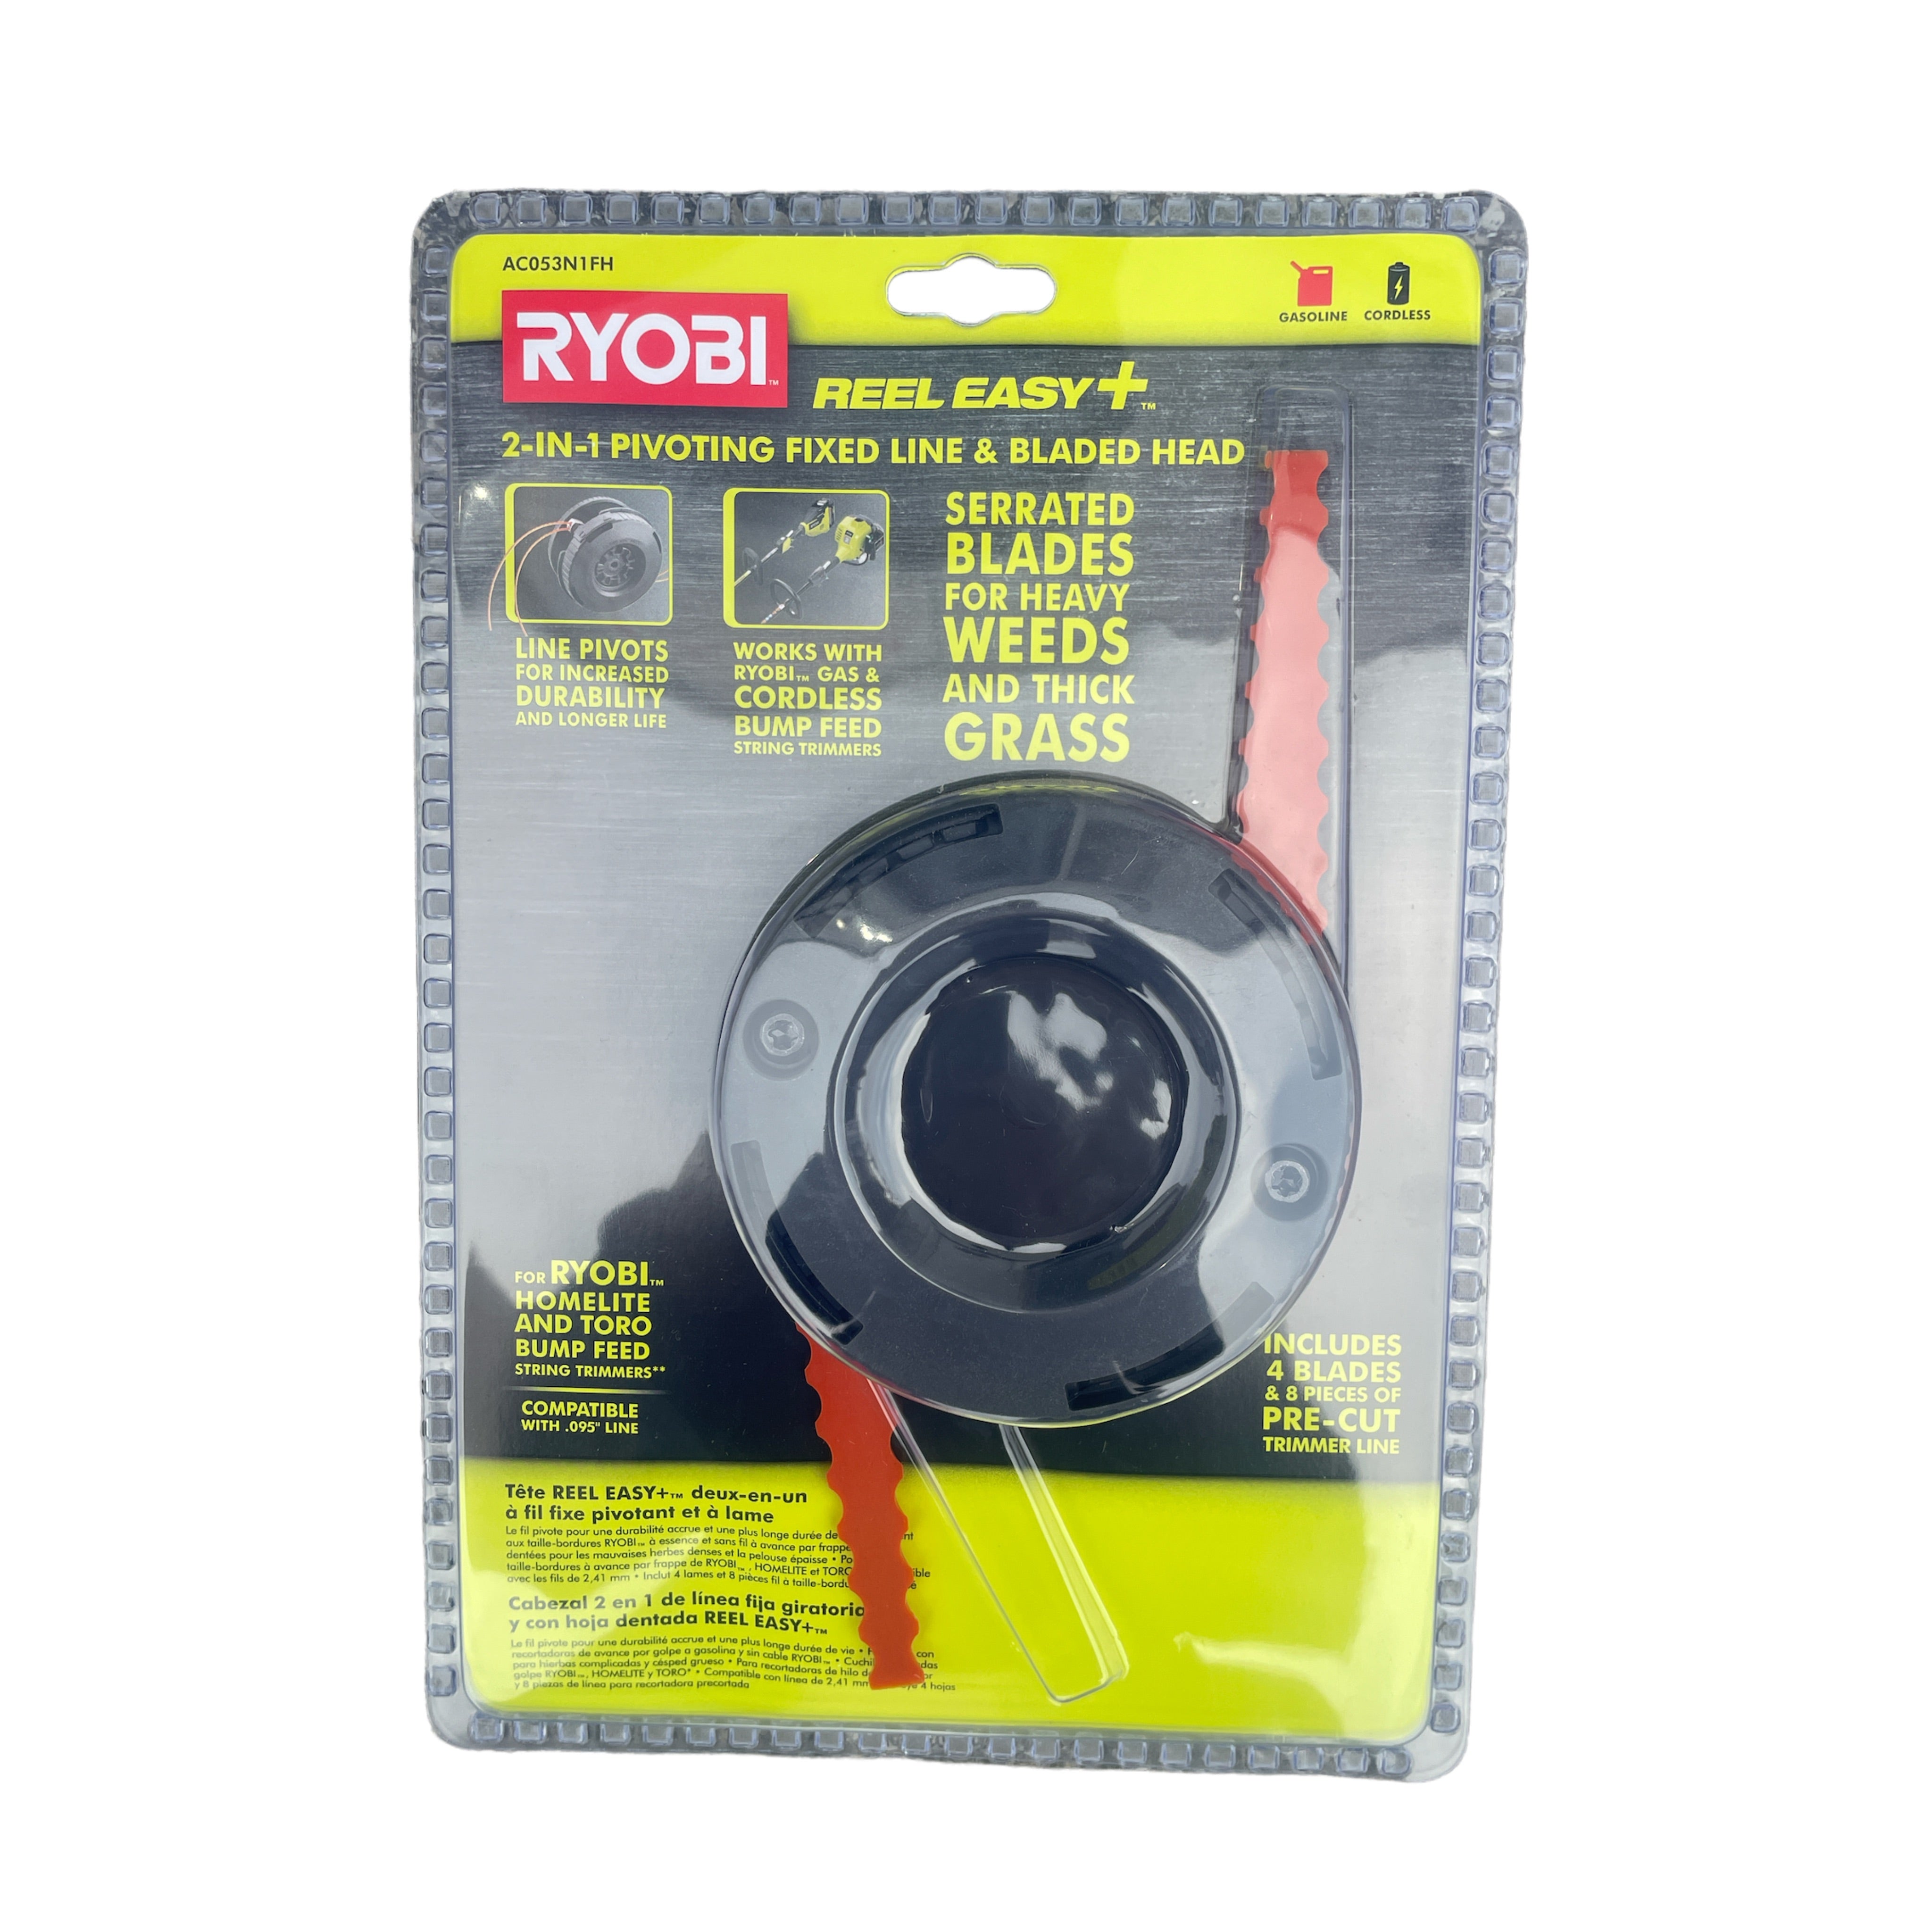 Ryobi Reel Easy+ 2-in-1 Pivoting Fixed Line and Bladed Head for Bump Feed Trimmers